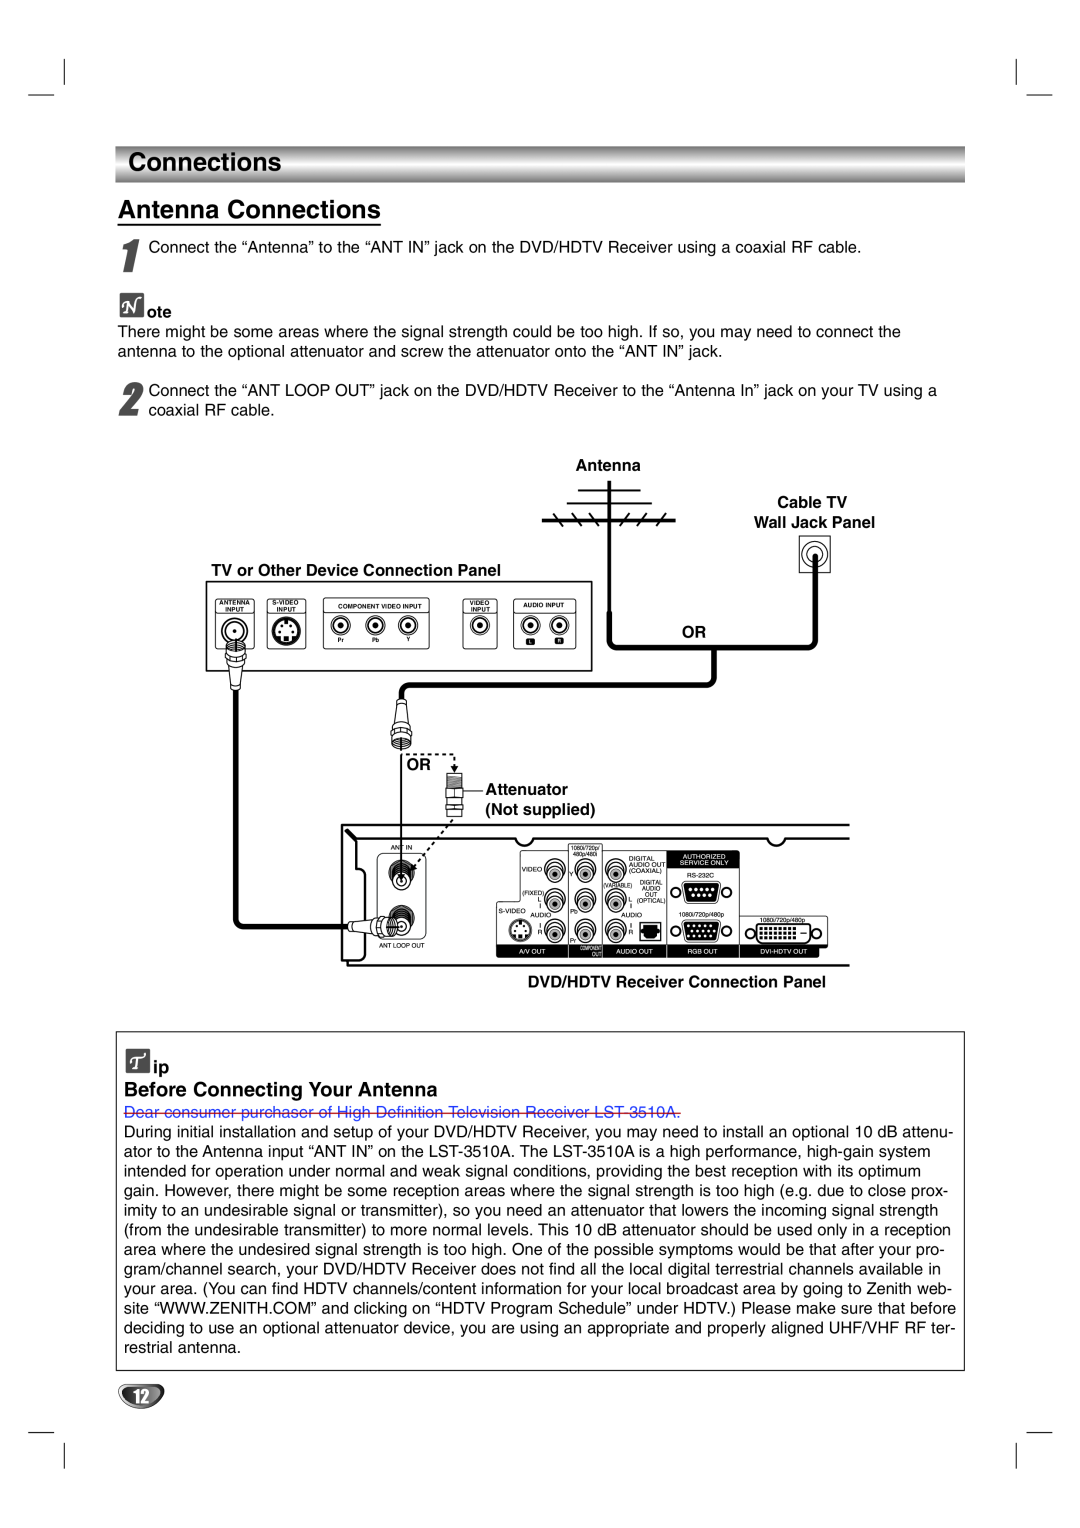 LG Electronics LST-3510A owner manual Connections Antenna Connections, Before Connecting Your Antenna 